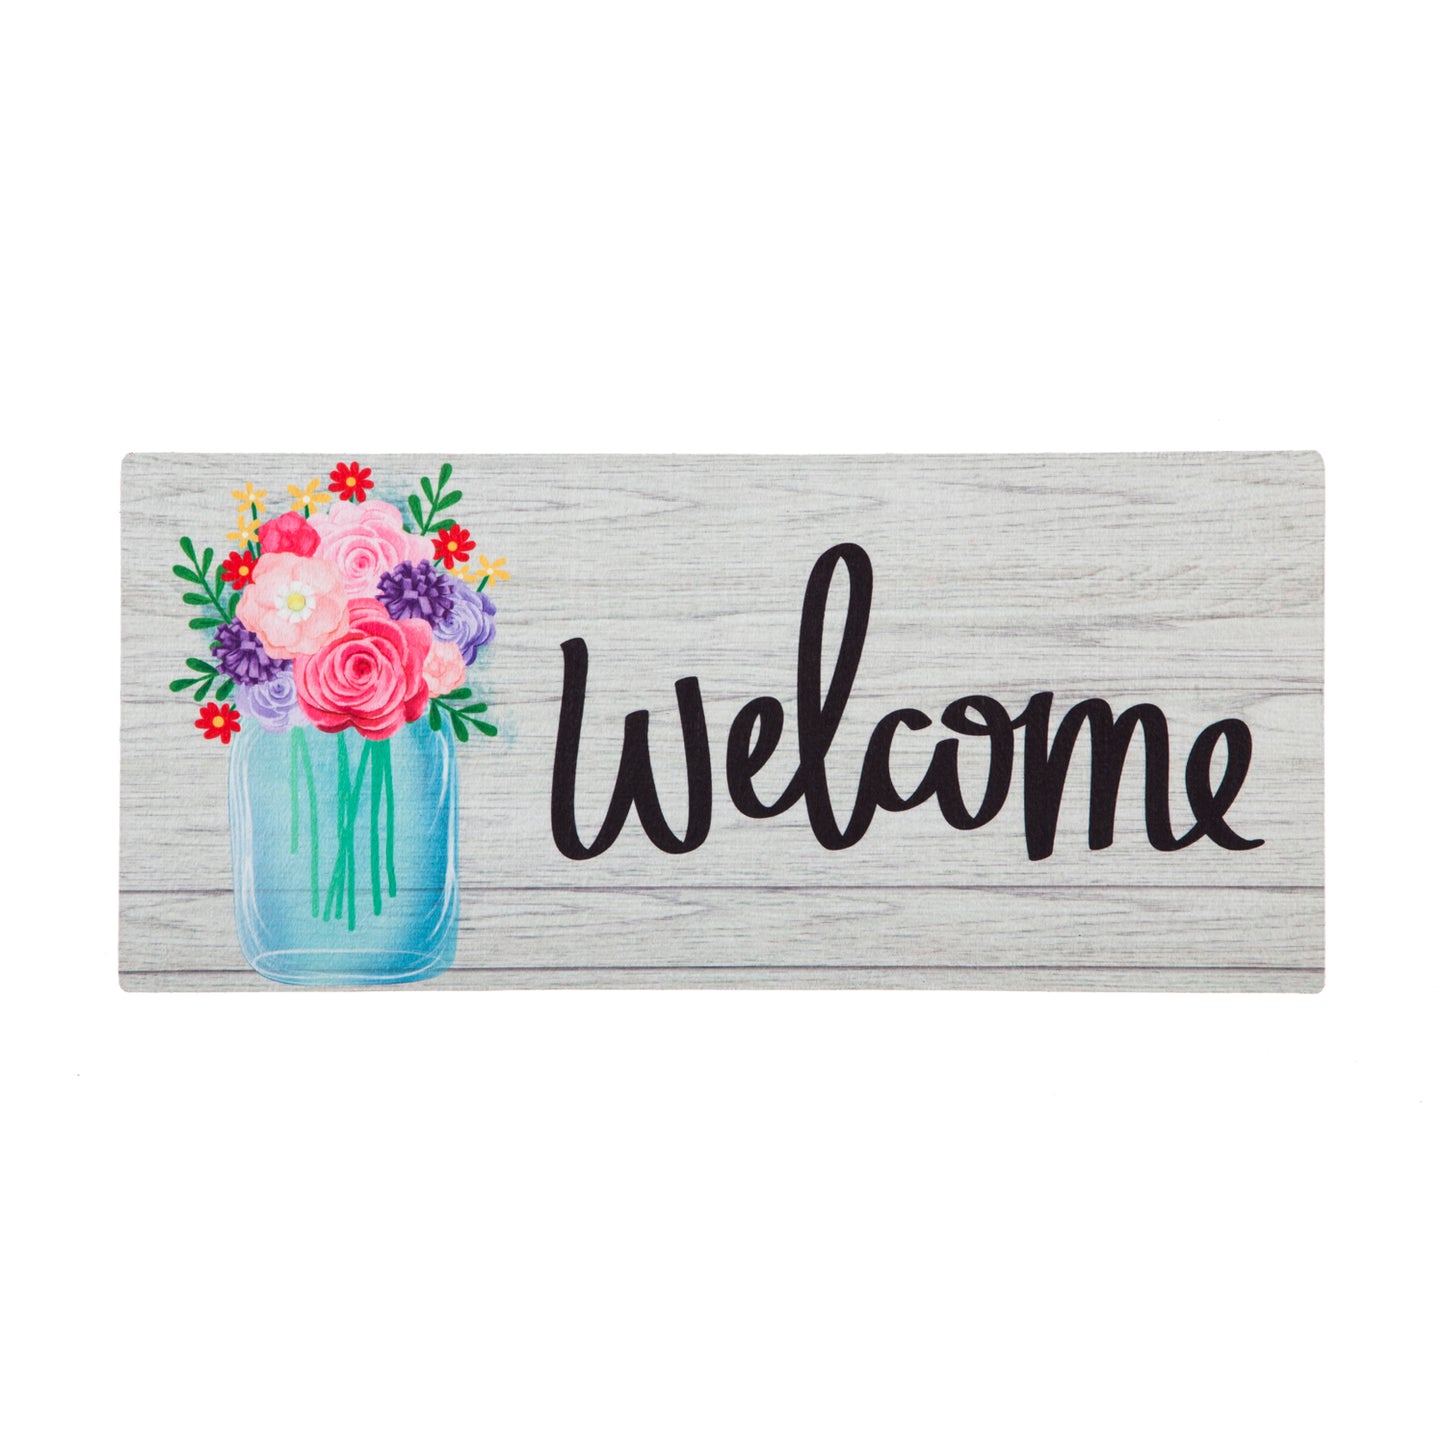 Sassafras Switch Mats Mason Jar Rustic Charm for Your Welcome